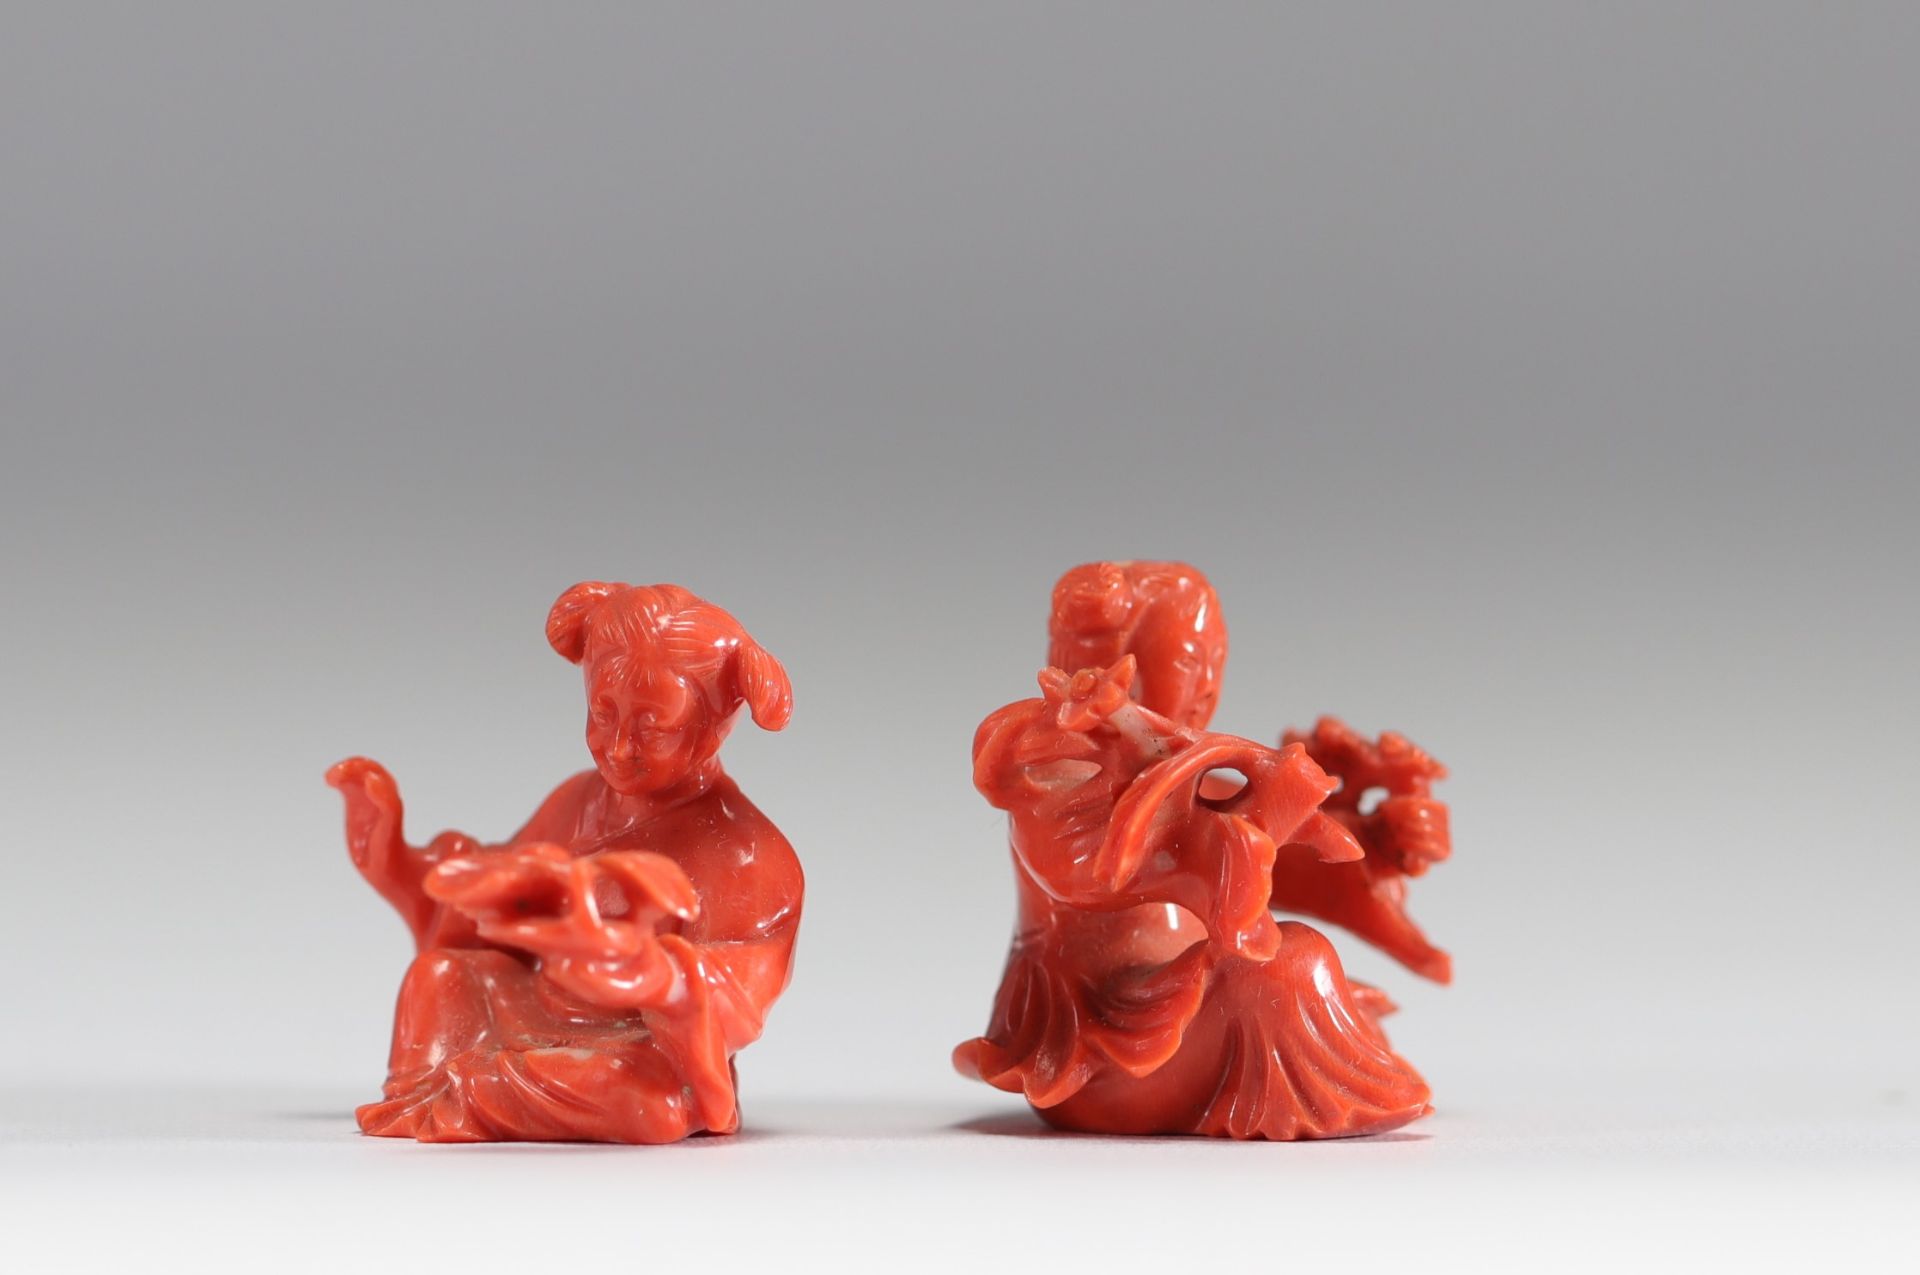 Red coral sculptures of young Chinese women, late 19th century - Image 2 of 4